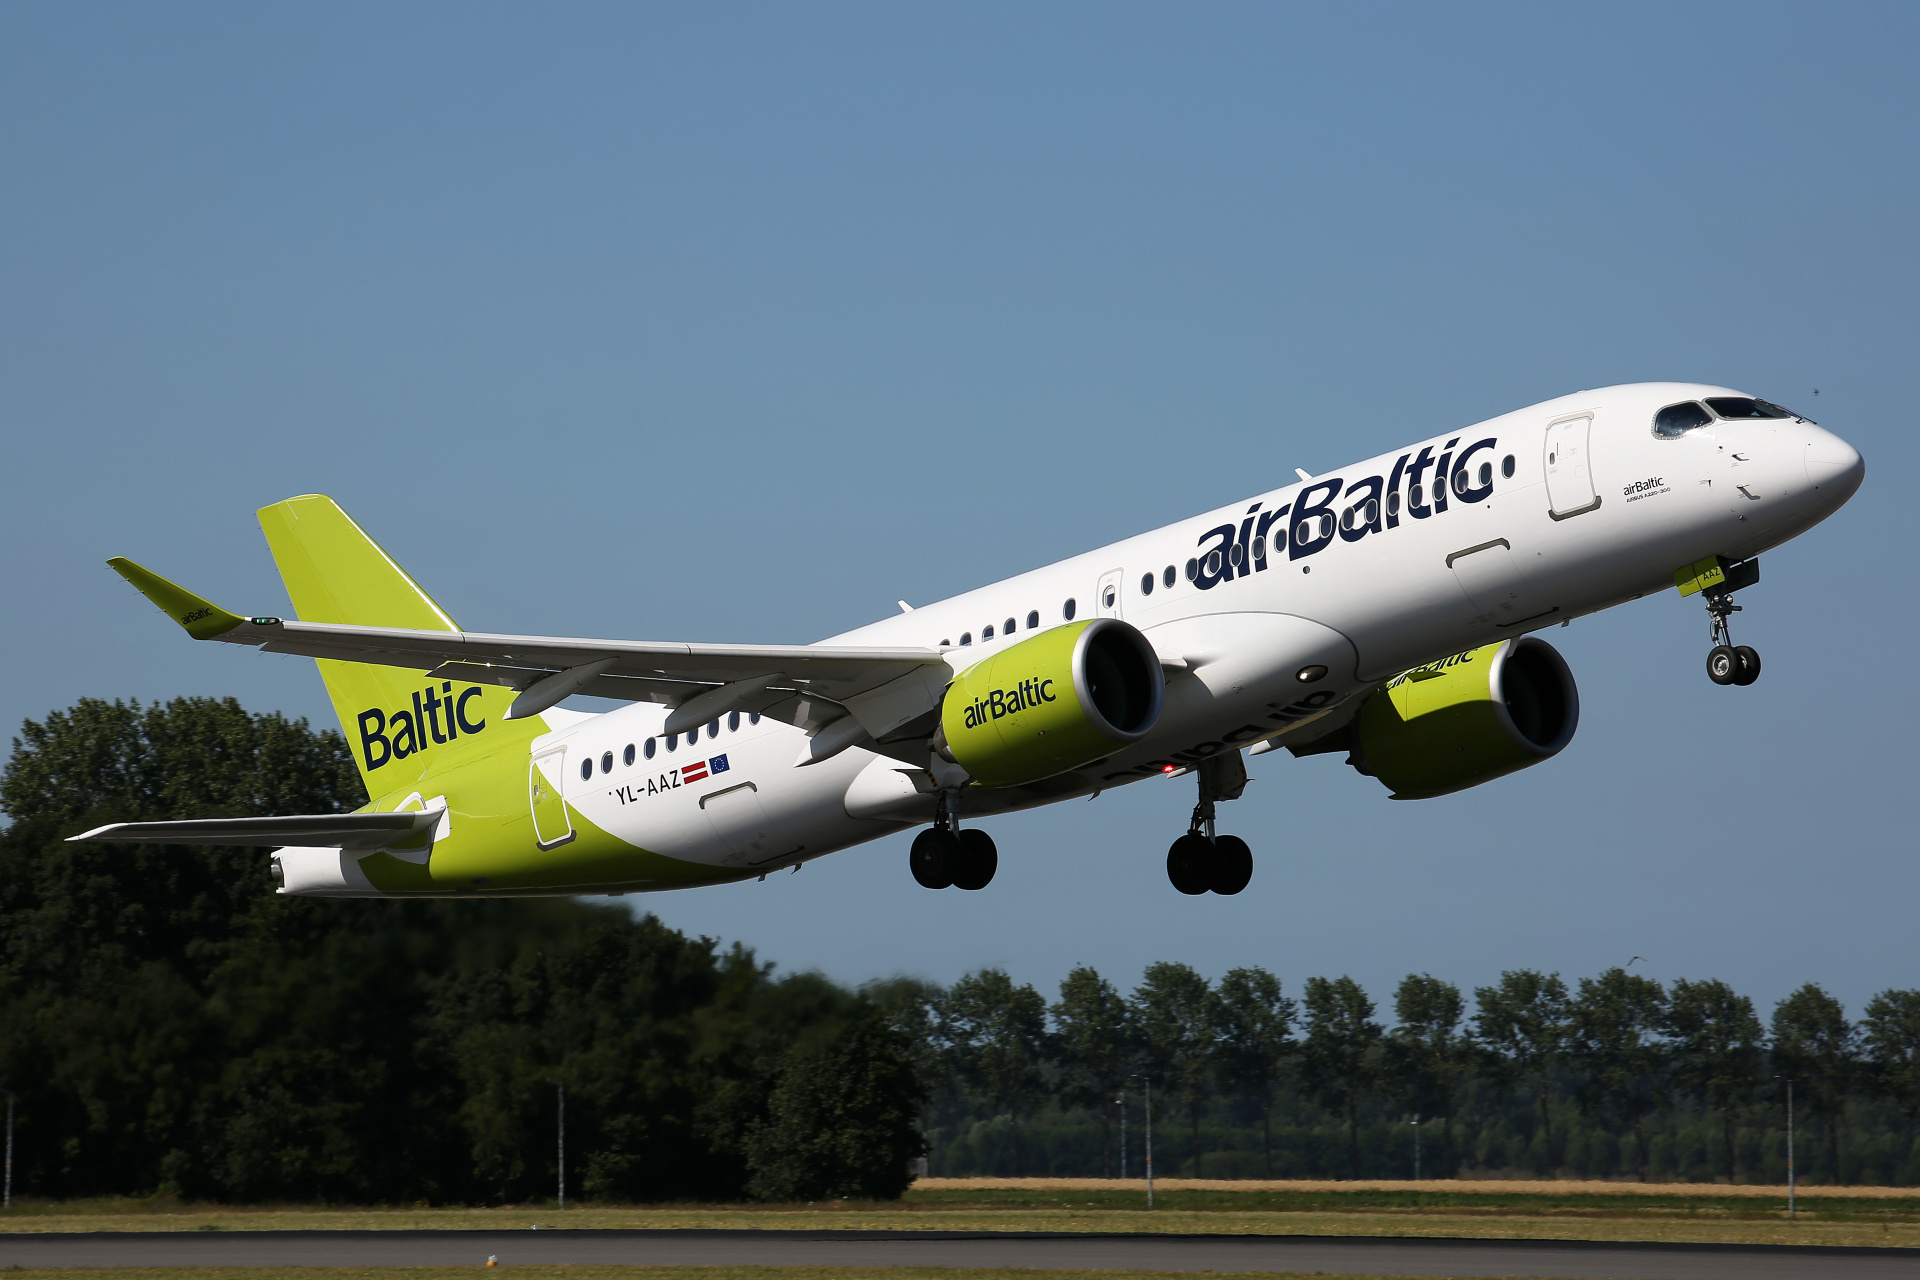 YL-AAZ, airBaltic (Aircraft » Schiphol Spotting » Airbus A220-300)